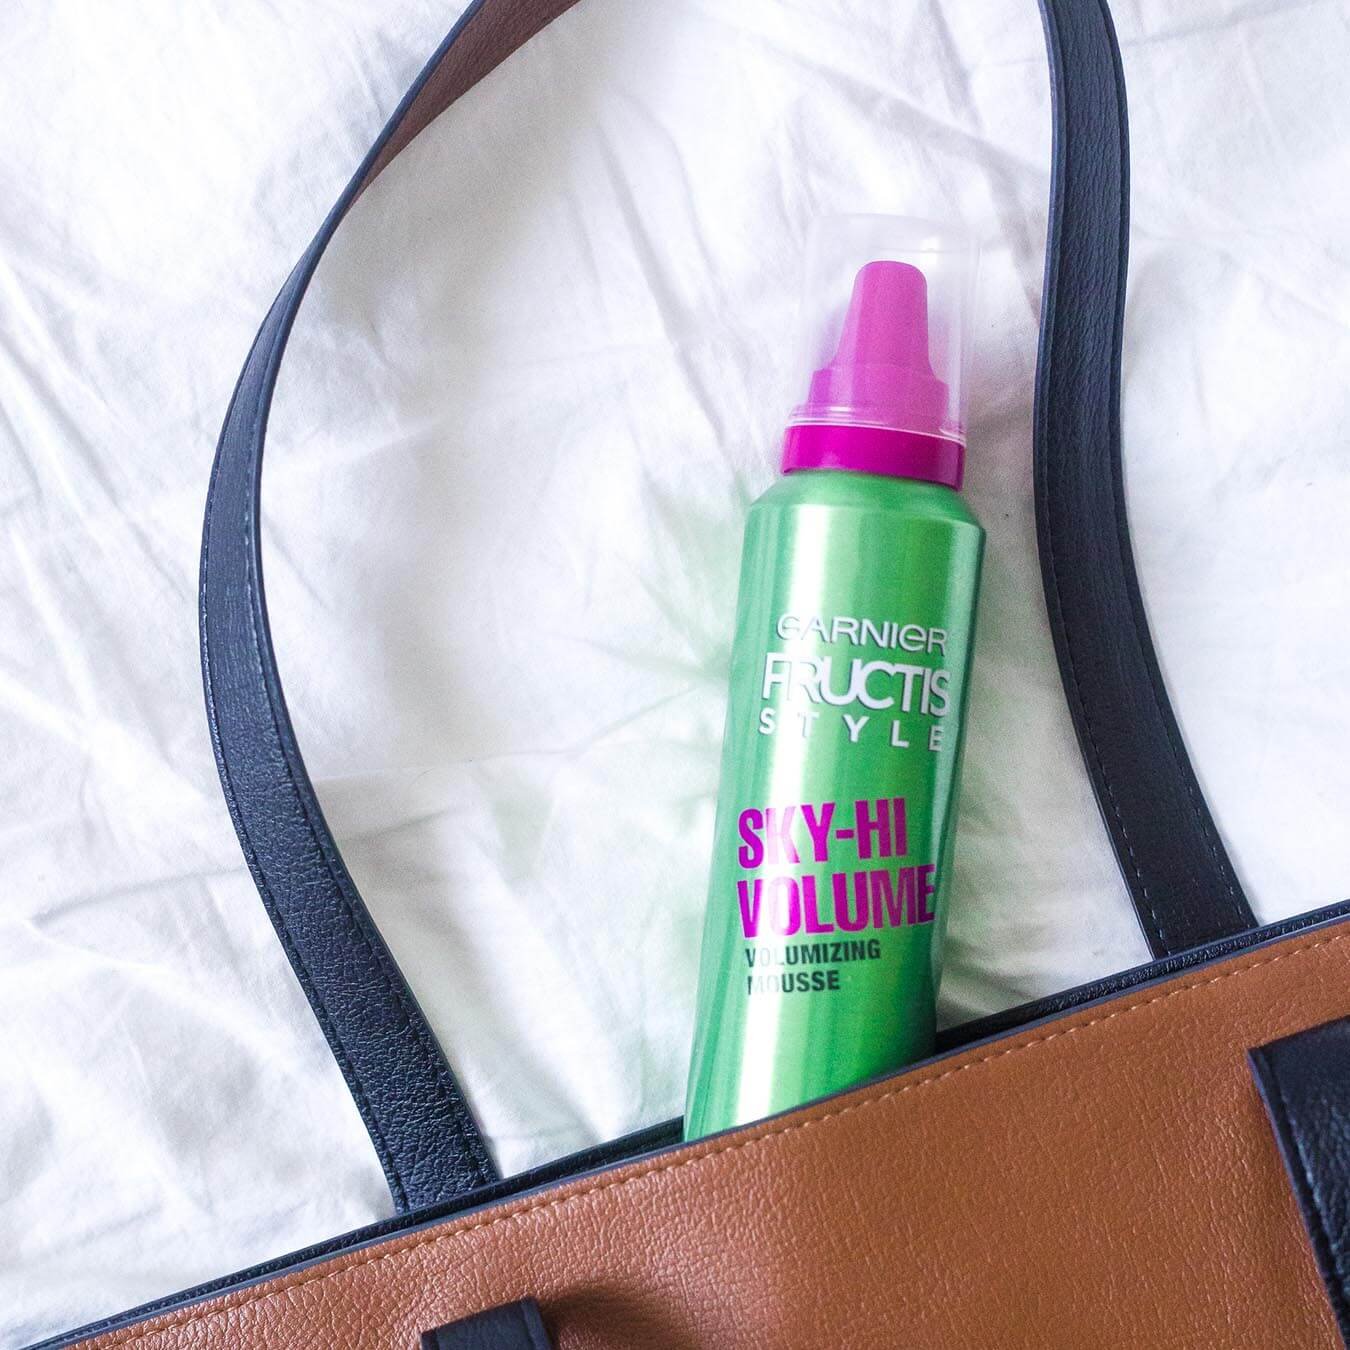 Garnier Fructis Style Sky-Hi Volume Volumizing Mousse peeking out of a brown purse with black straps on white cloth.